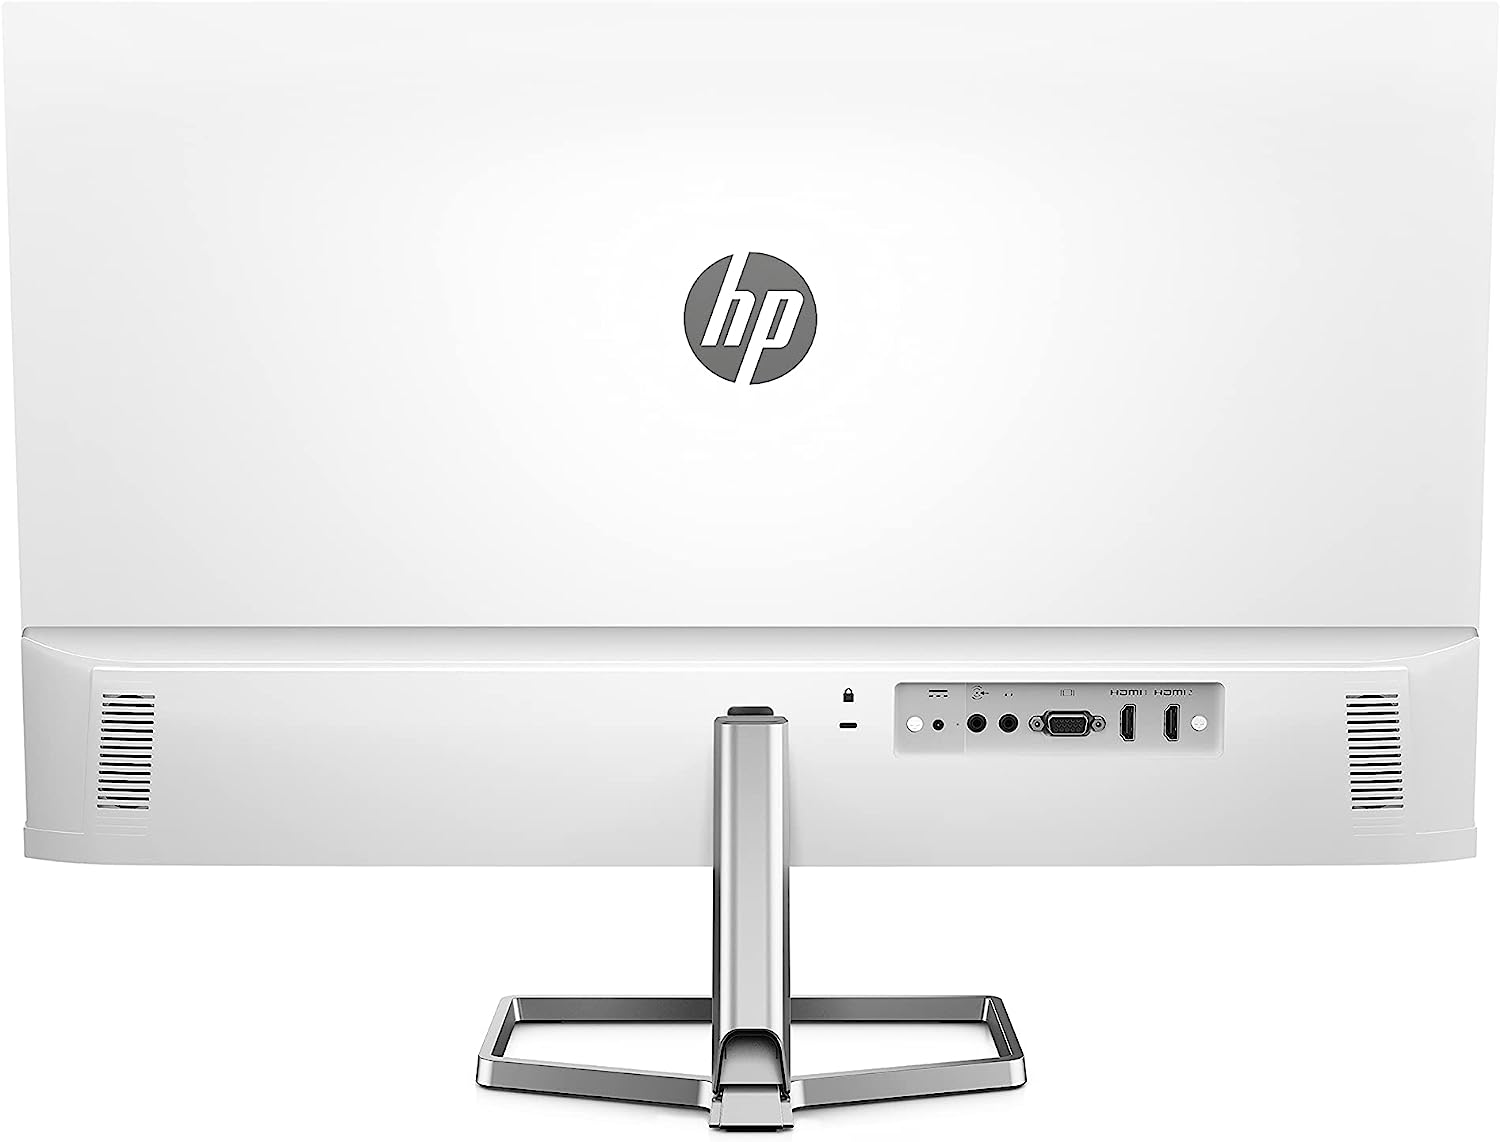 HP M27fwa 27 in FHD IPS LED Backlit Monitor with Audio White Color